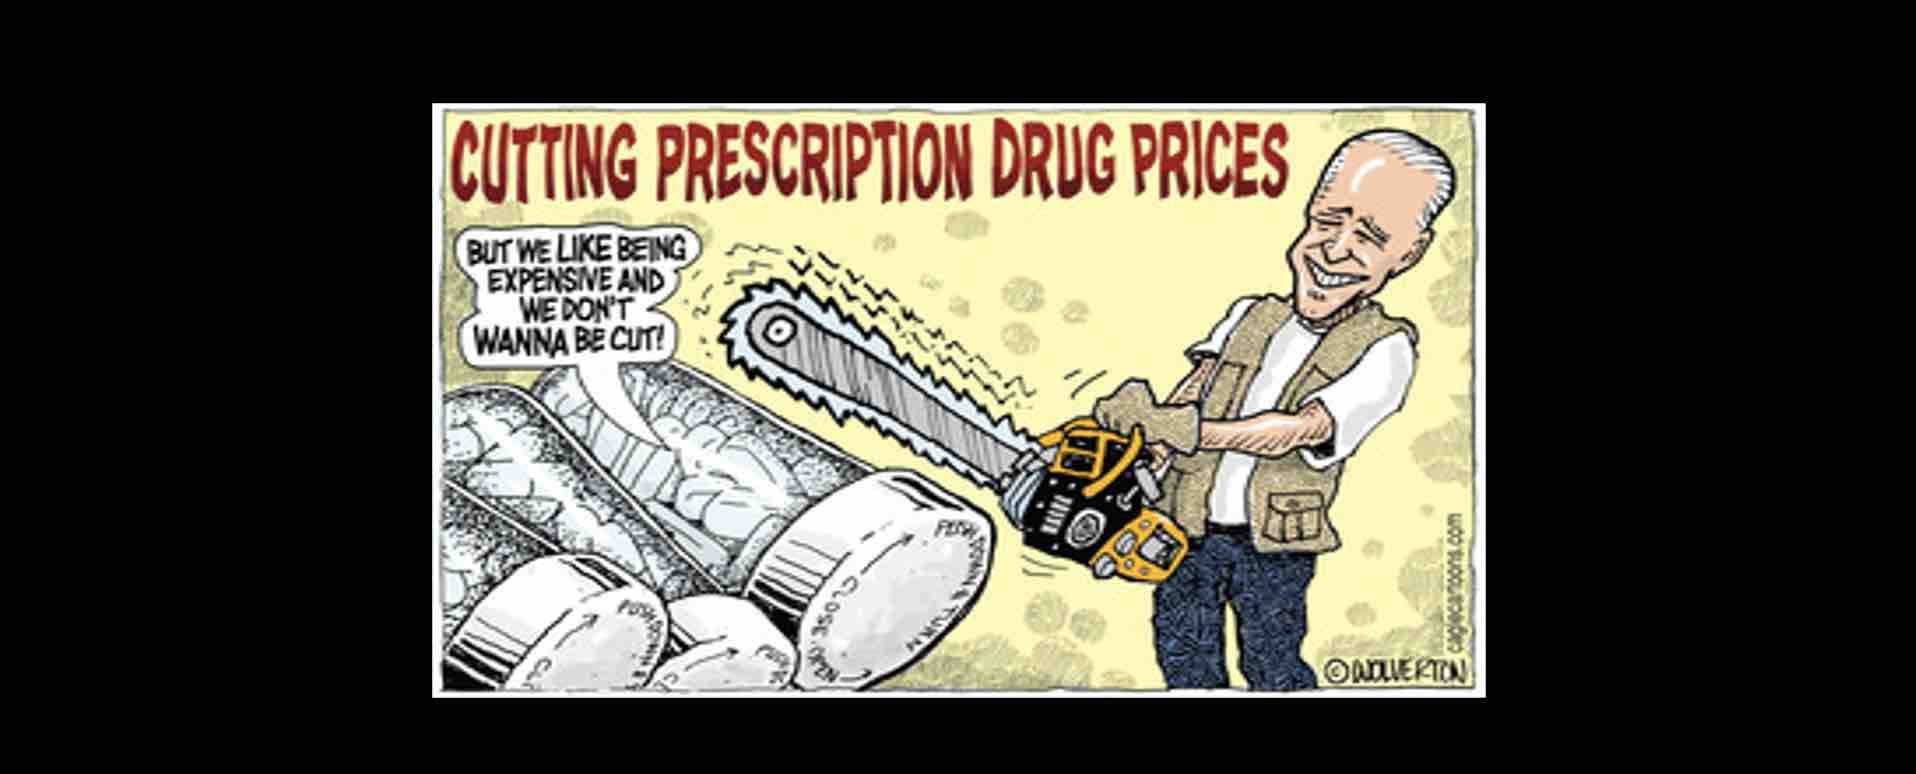 Where do lower prescription drug prices help the most